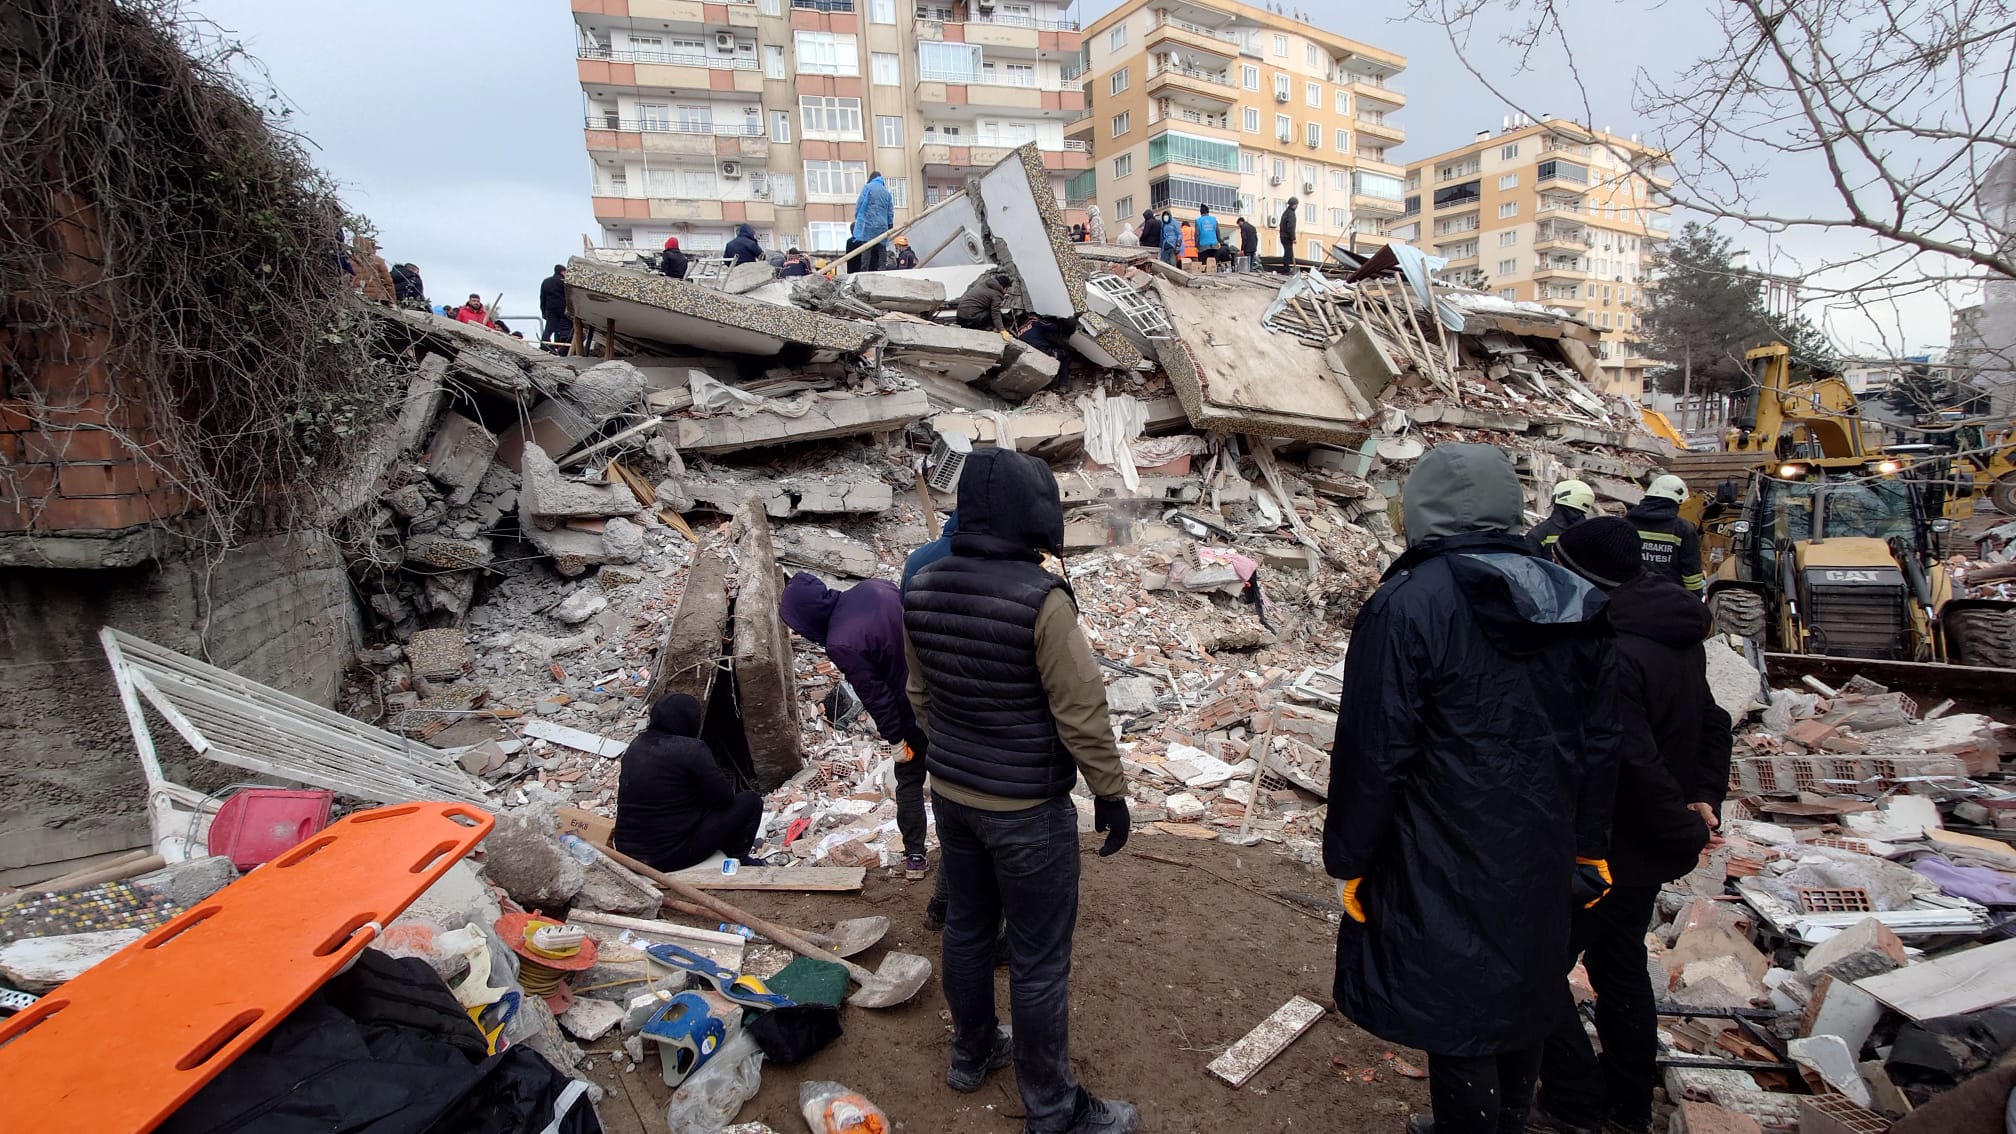 Churches reach out with care and prayers in wake of powerful earthquake in Turkey and Syria